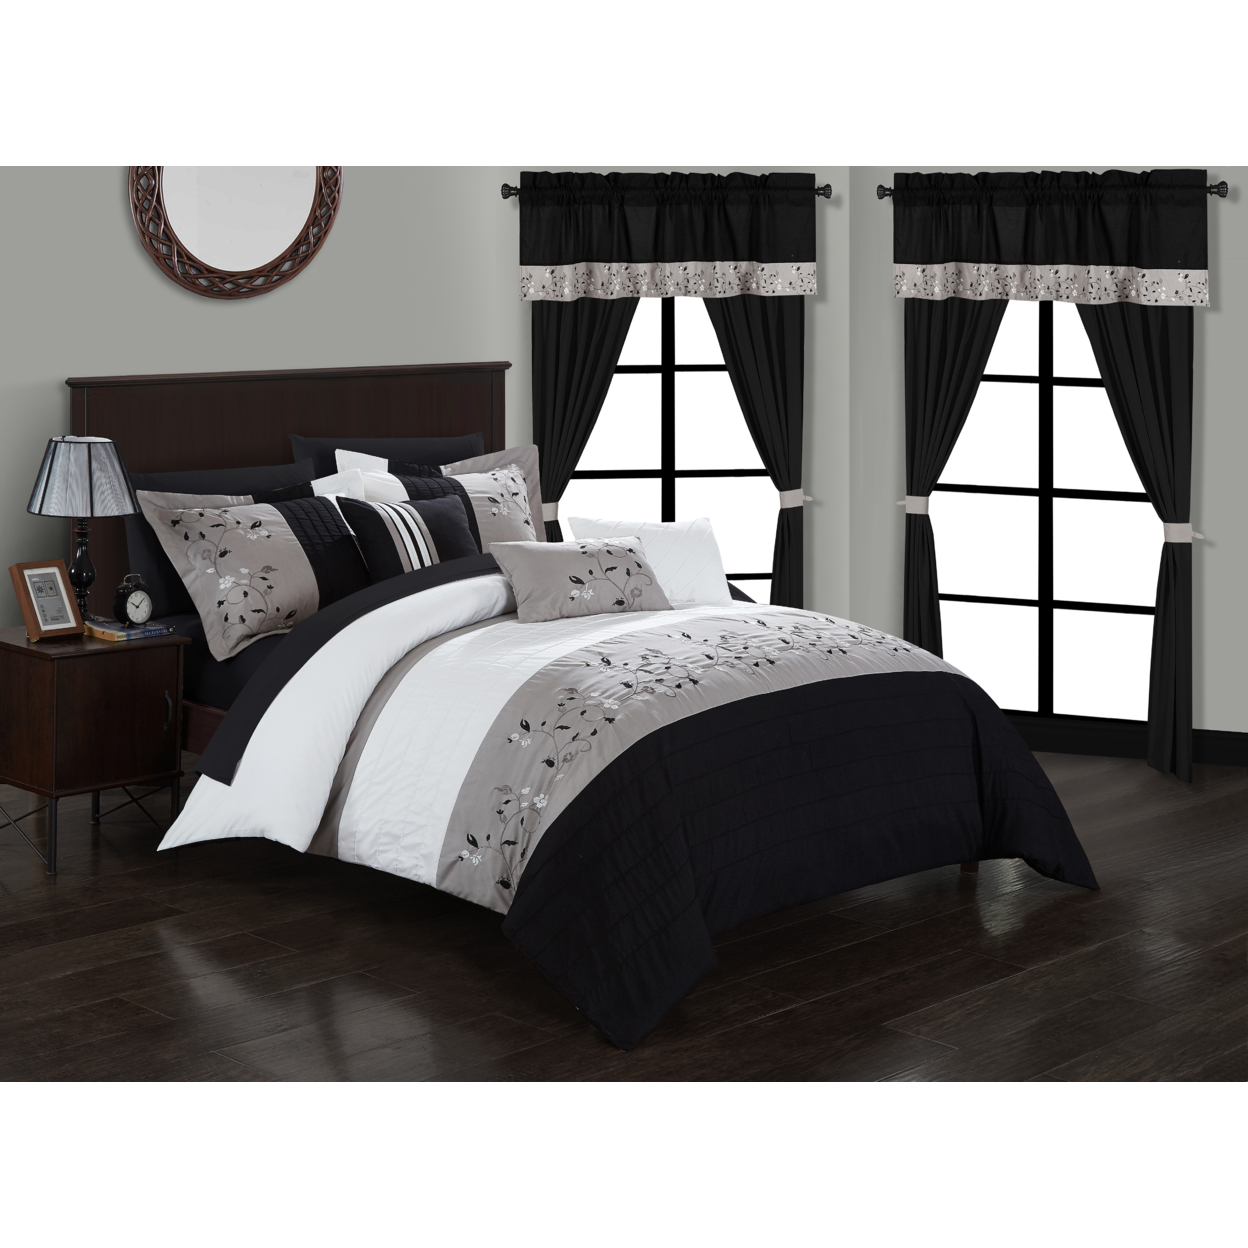 Sonita 20-Piece Bedding Set With Comforter, Sheets & Curtains, Mult. Colors - Black, Queen